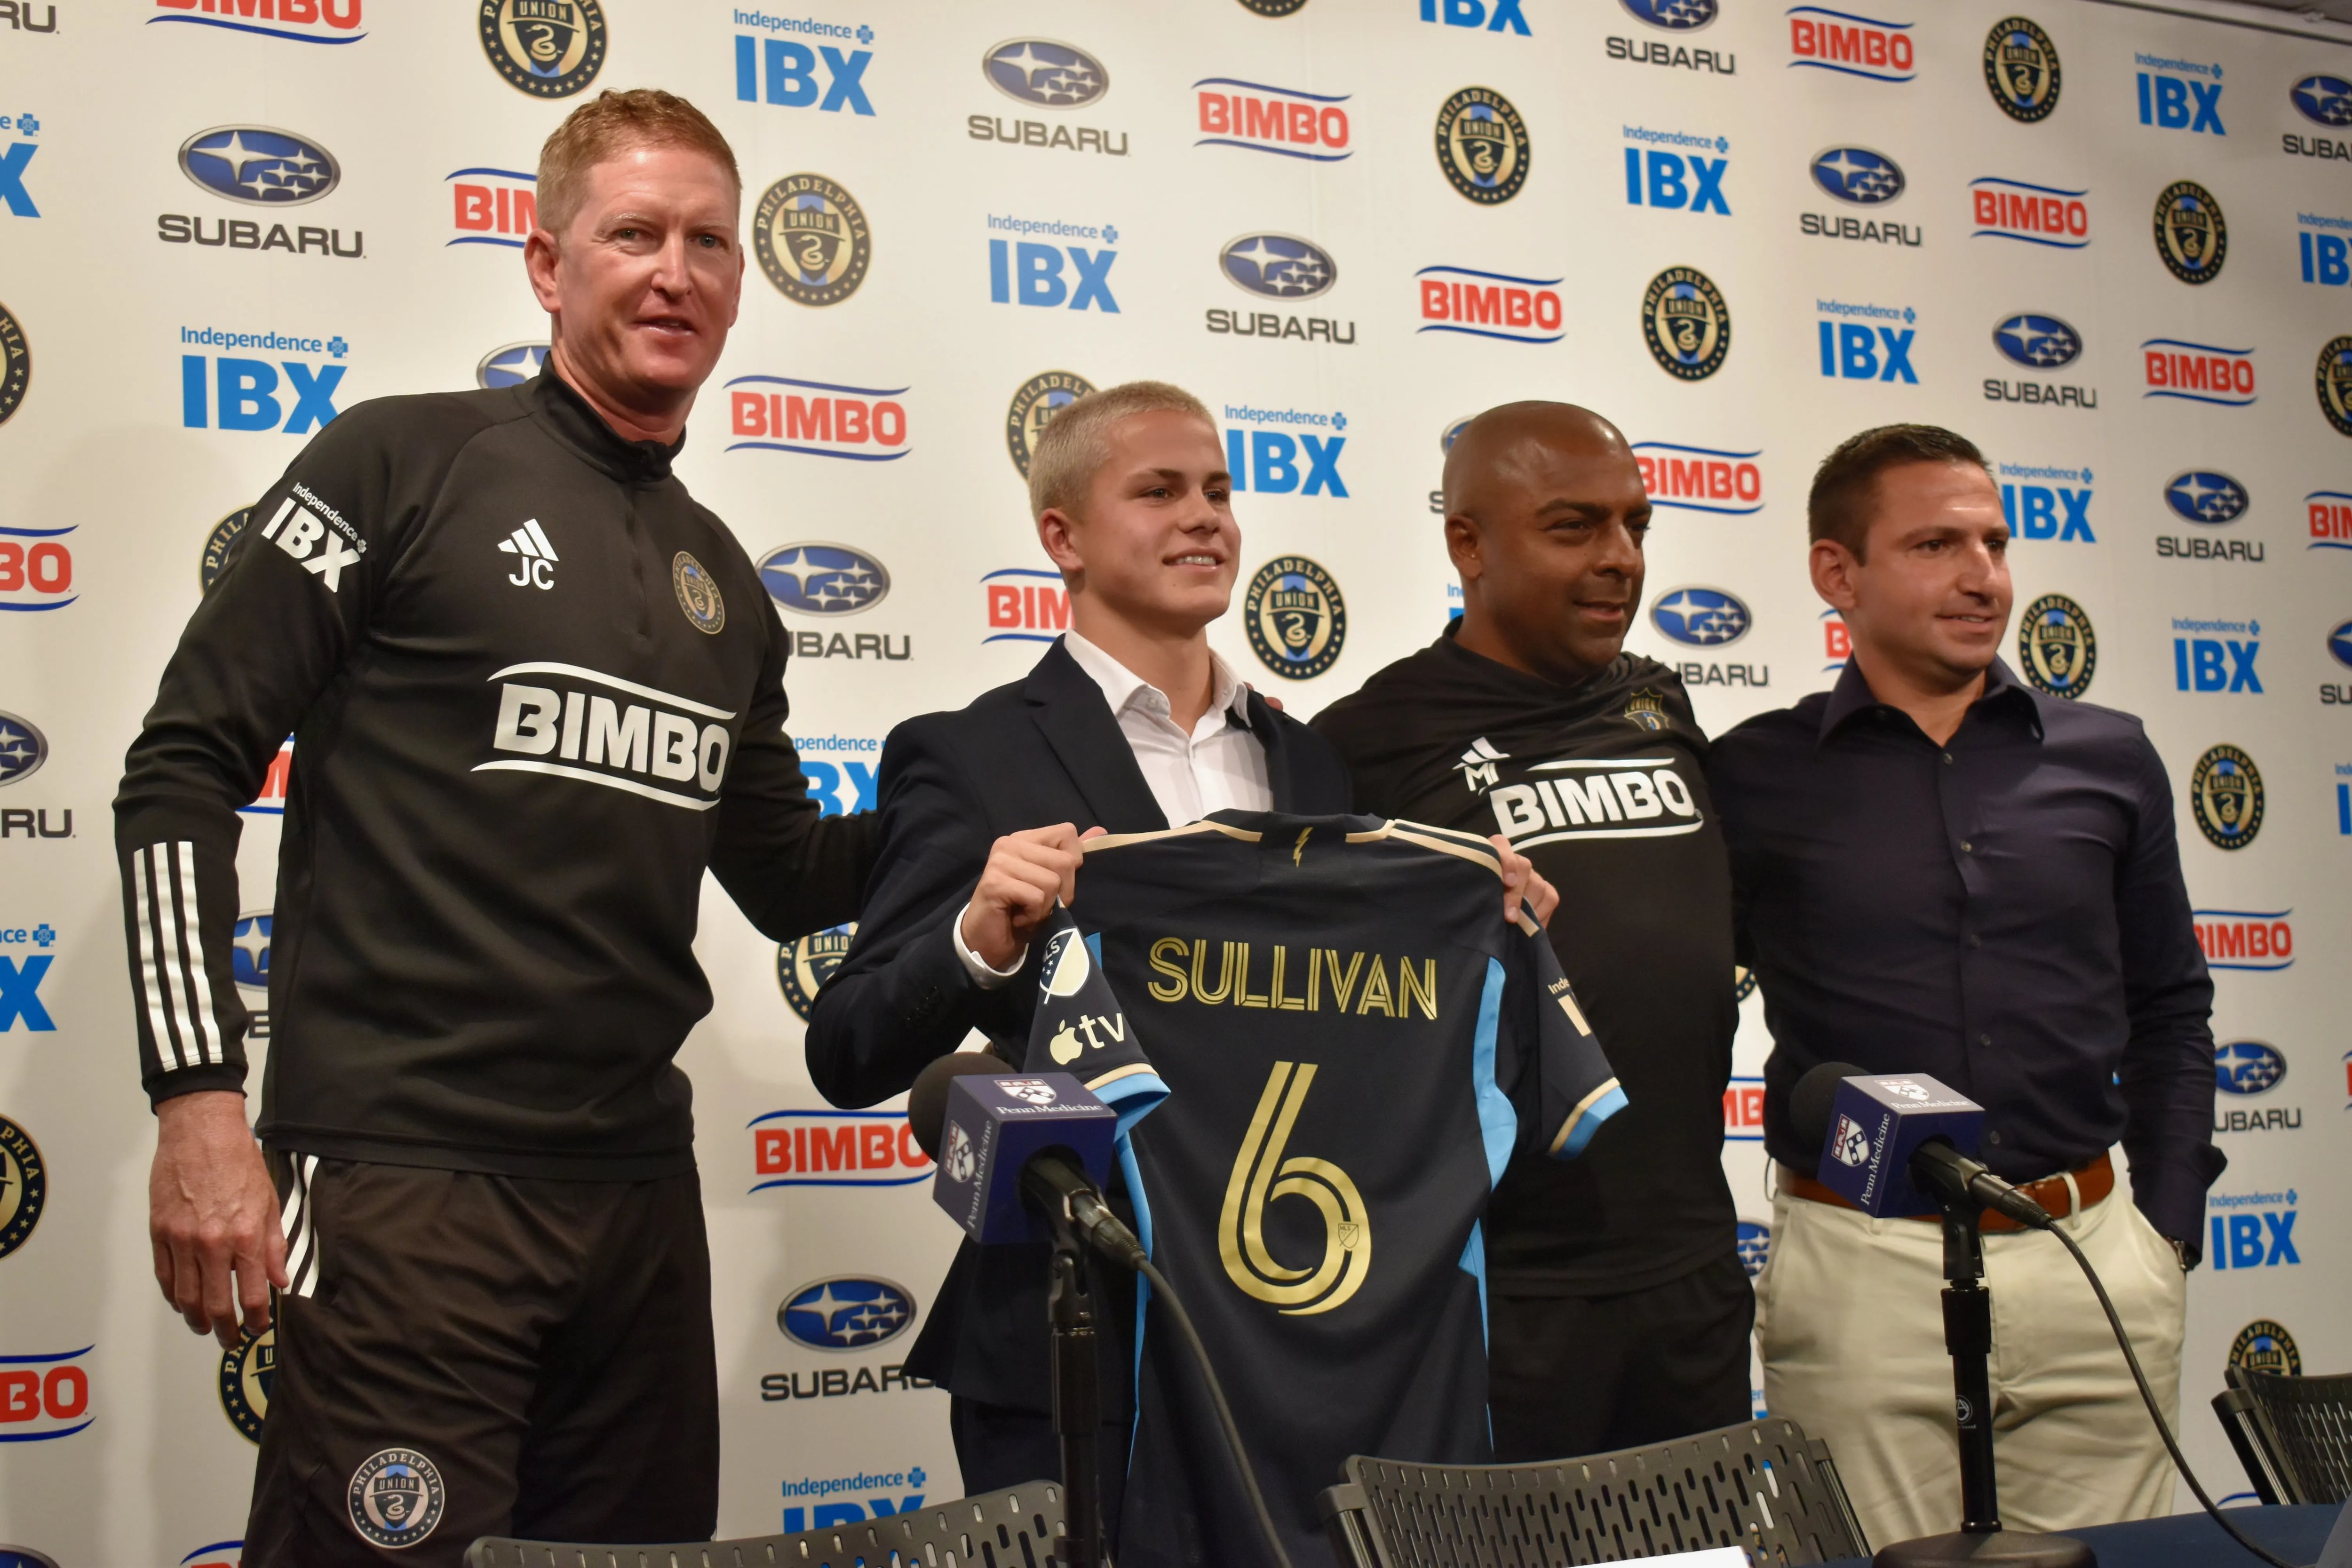 From left to right: Union manager Jim Curtin, Cavan Sullivan, reserve team coach Marlon LeBlanc, and academy director Jon Scheer pose for a photo as Sullivan holds up his new No. 6 jersey after a news conference Thursday at Subaru Park.